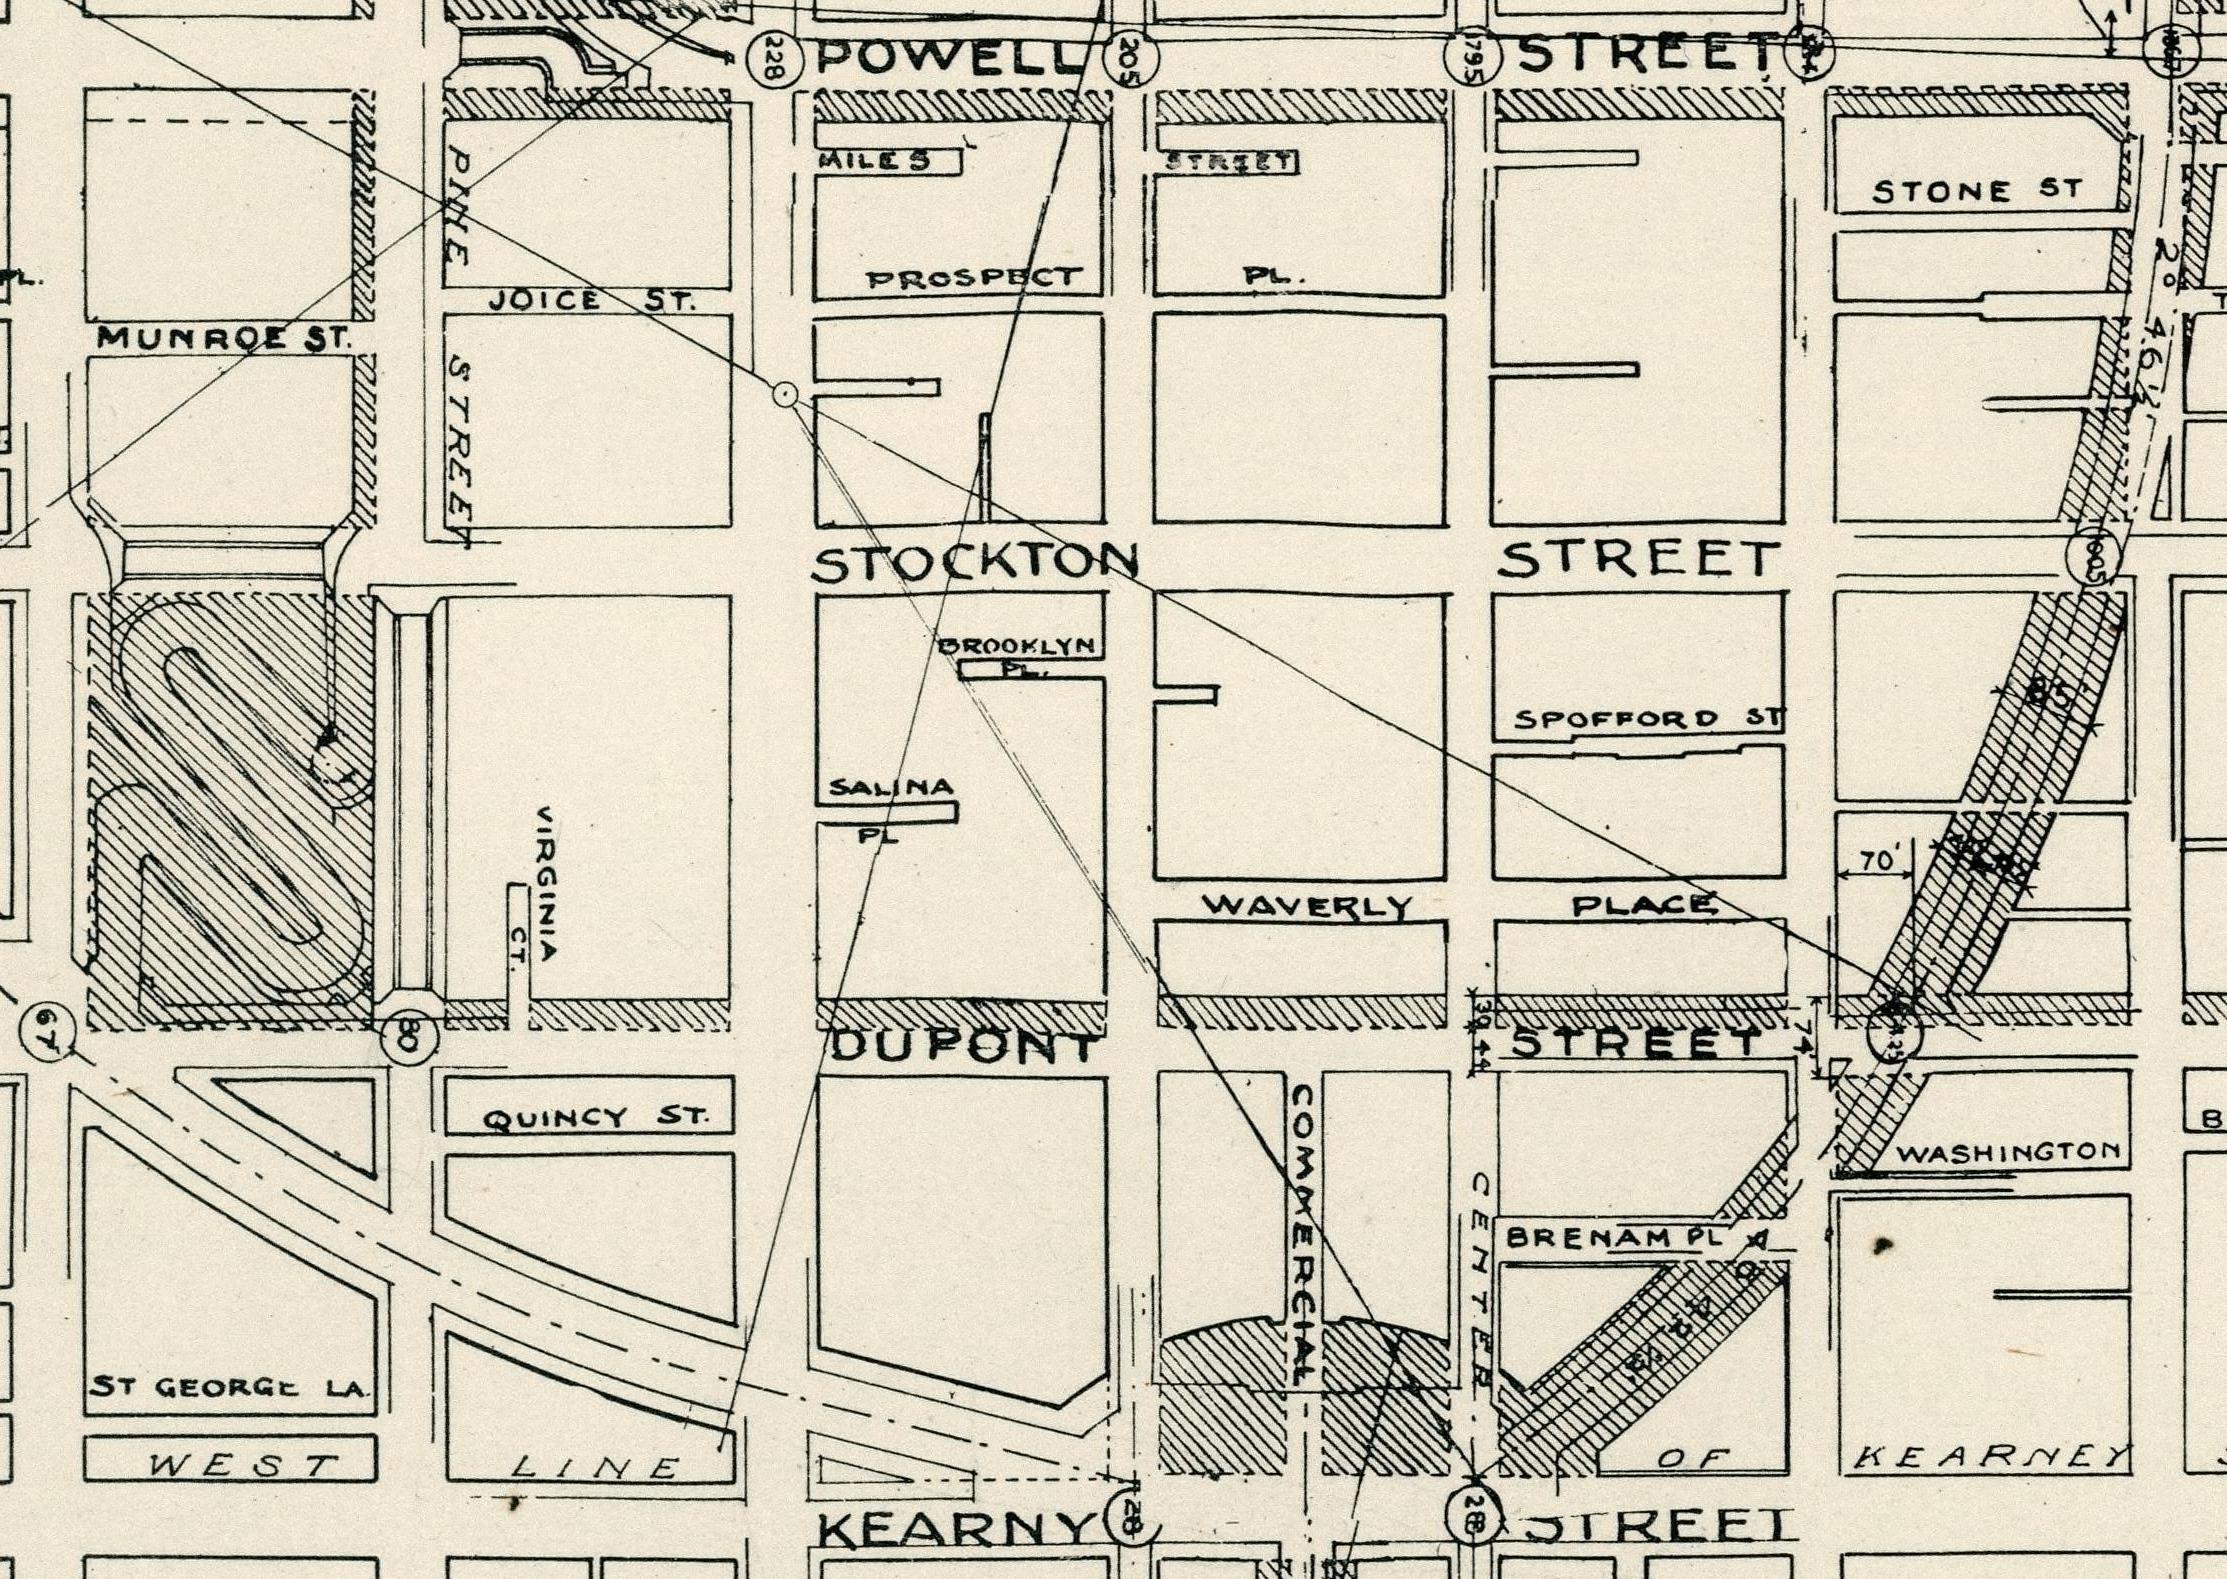 Close up of proposed street widening changes. From Plan of proposed street changes in the burned district and other sections (1906), David Rumsey Map Collection.